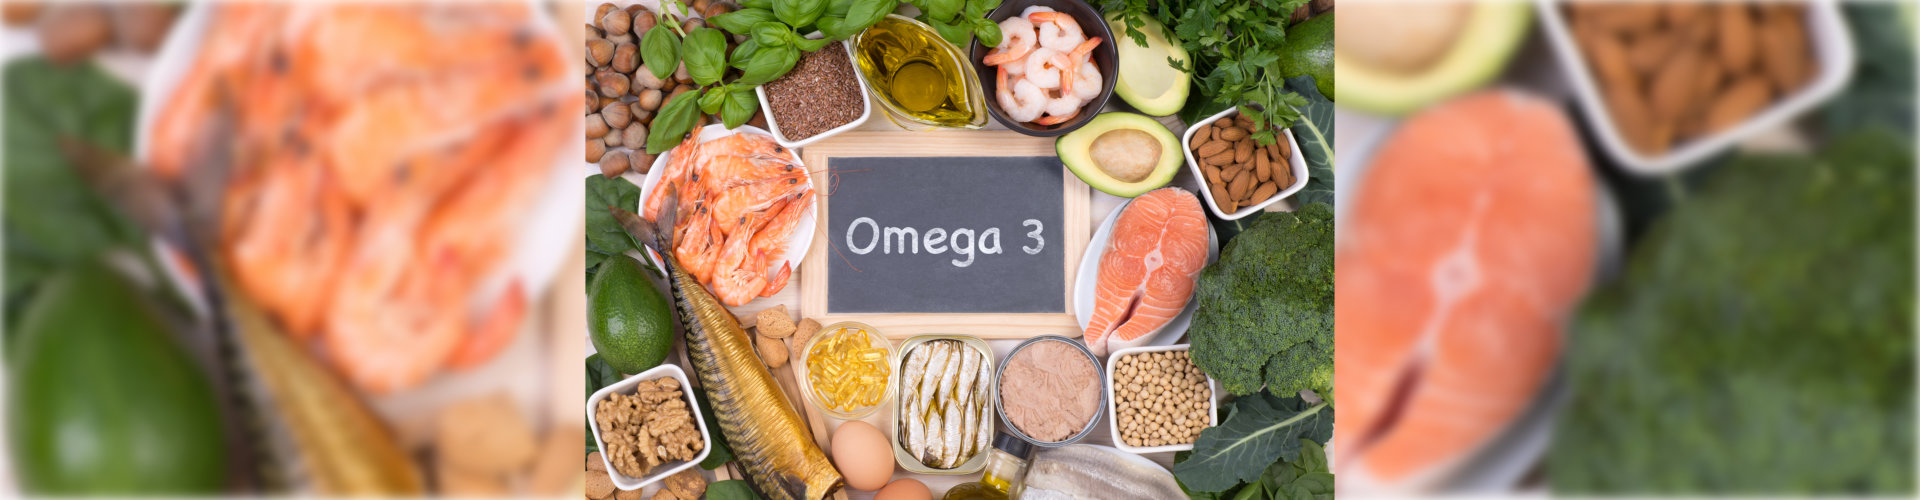 omega 3 sign with food around